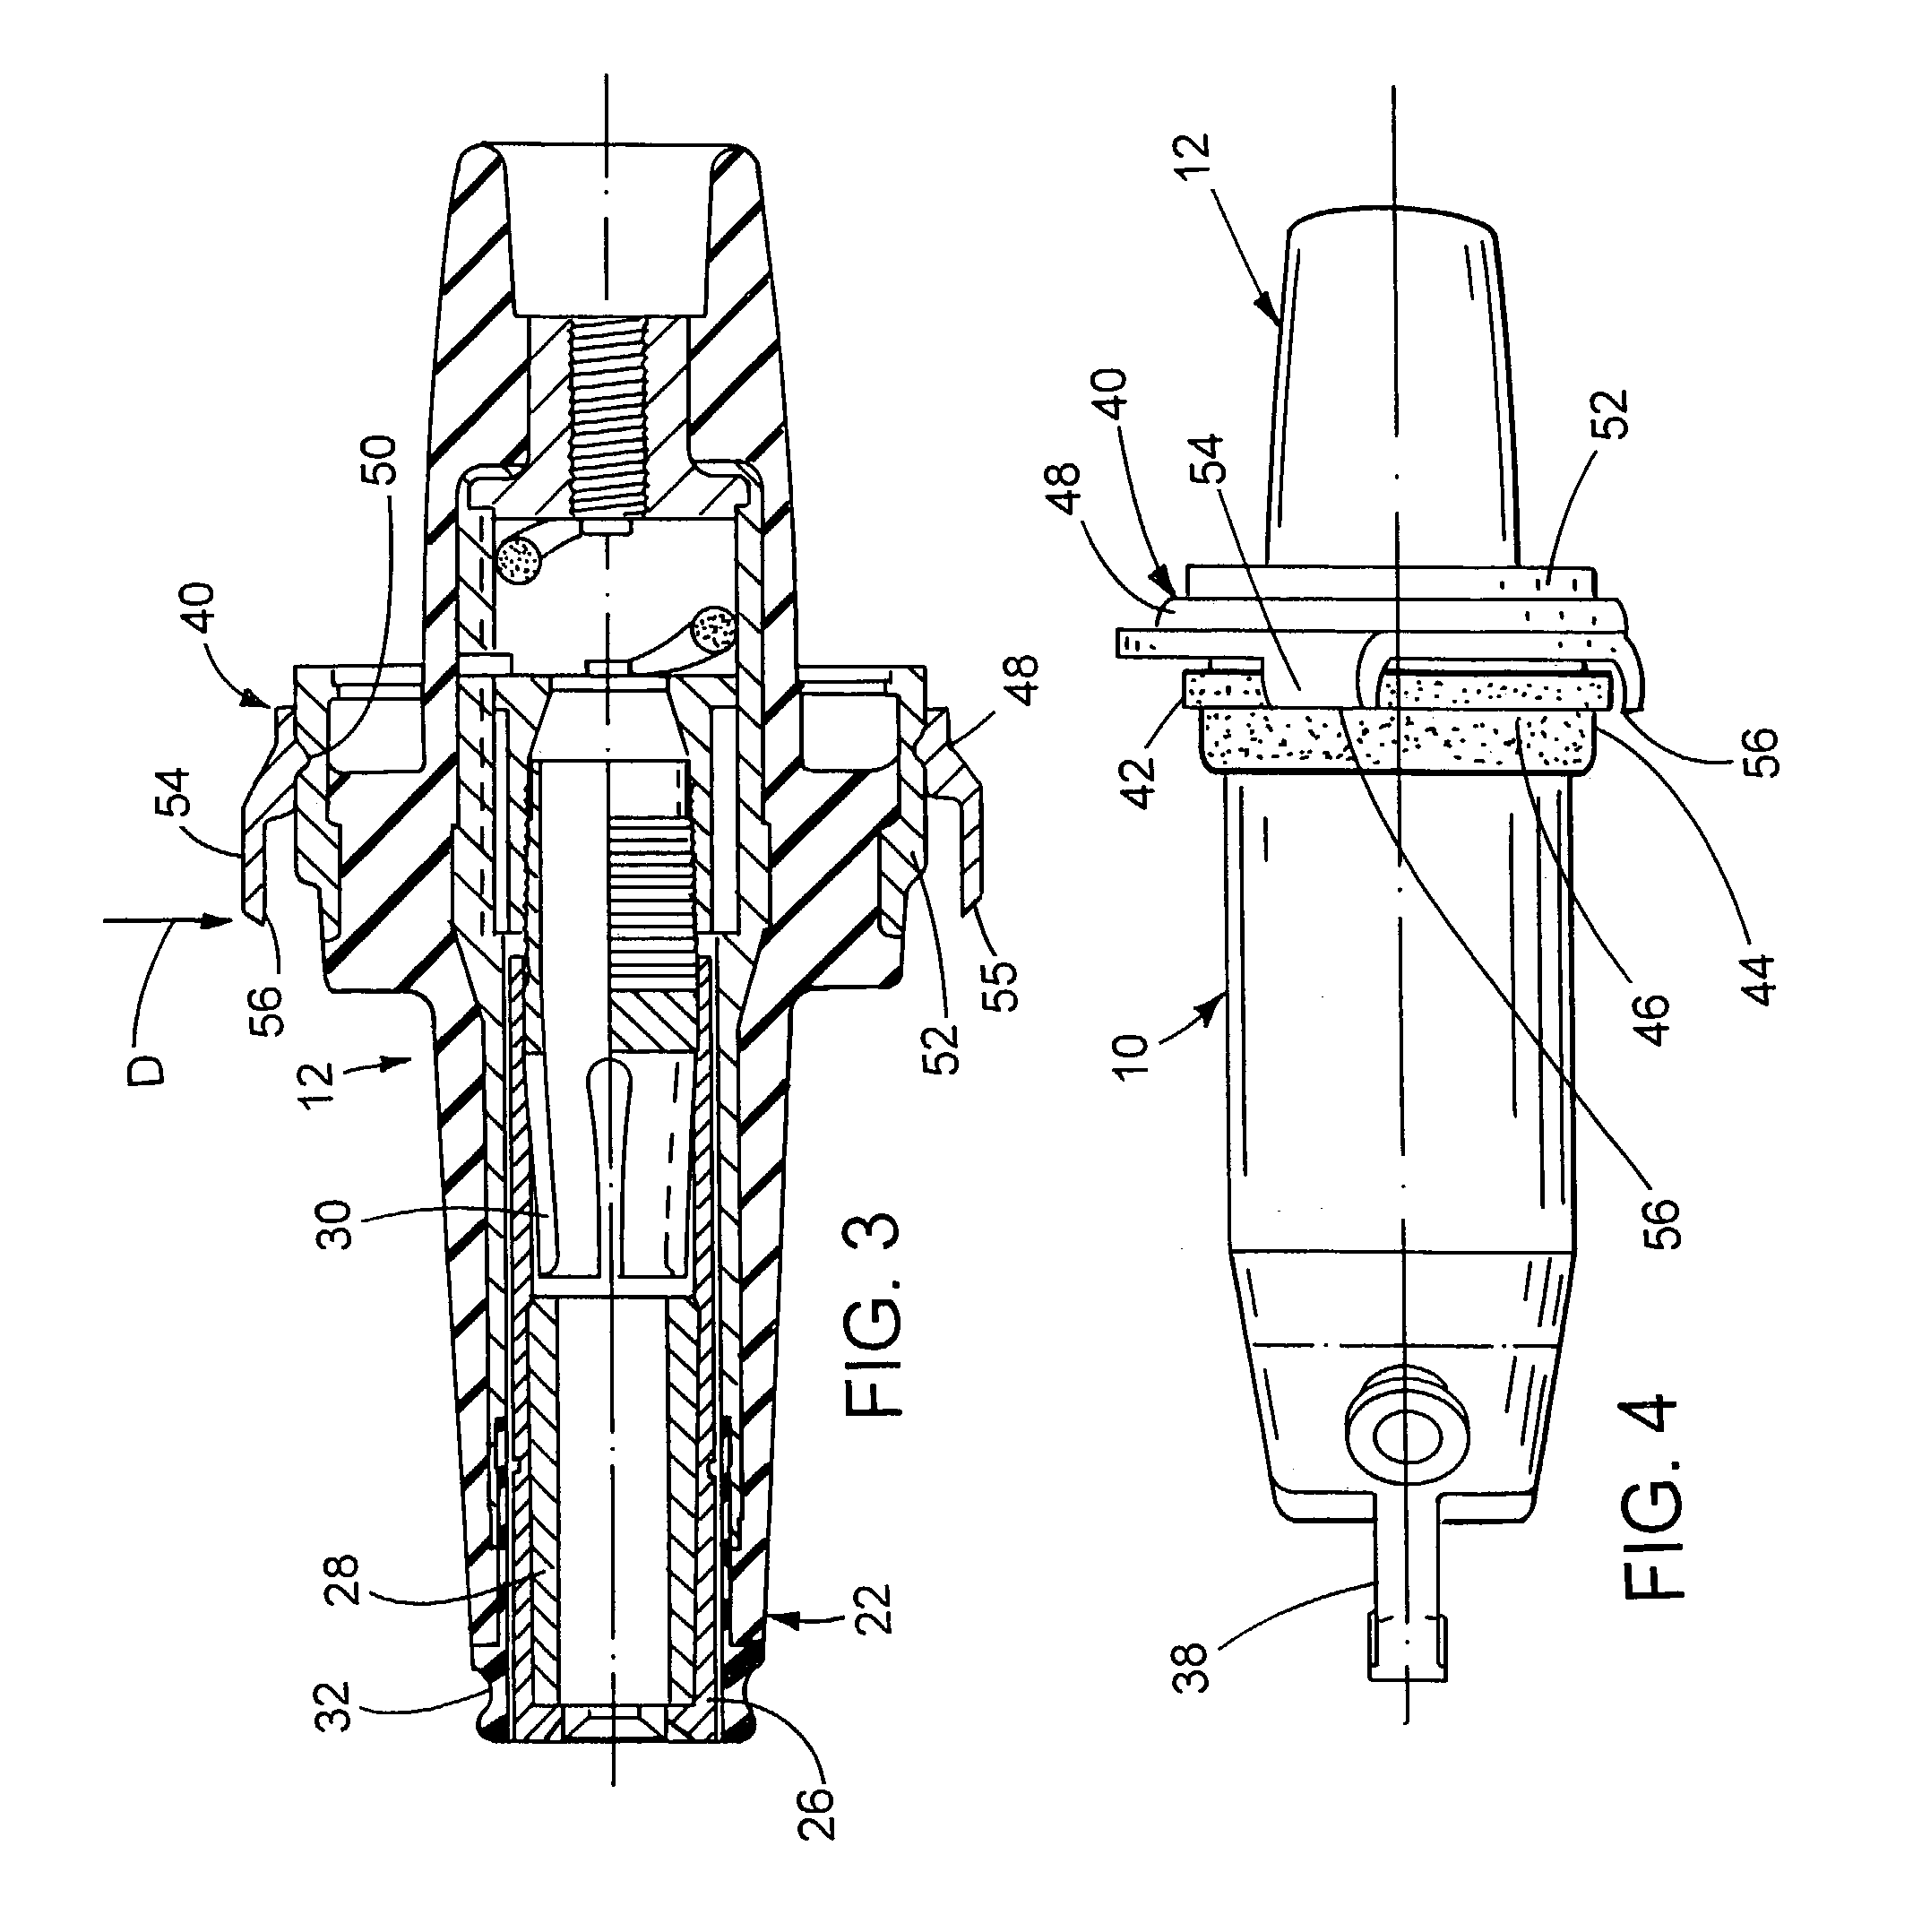 Visual latching indicator arrangement for an electrical bushing and terminator